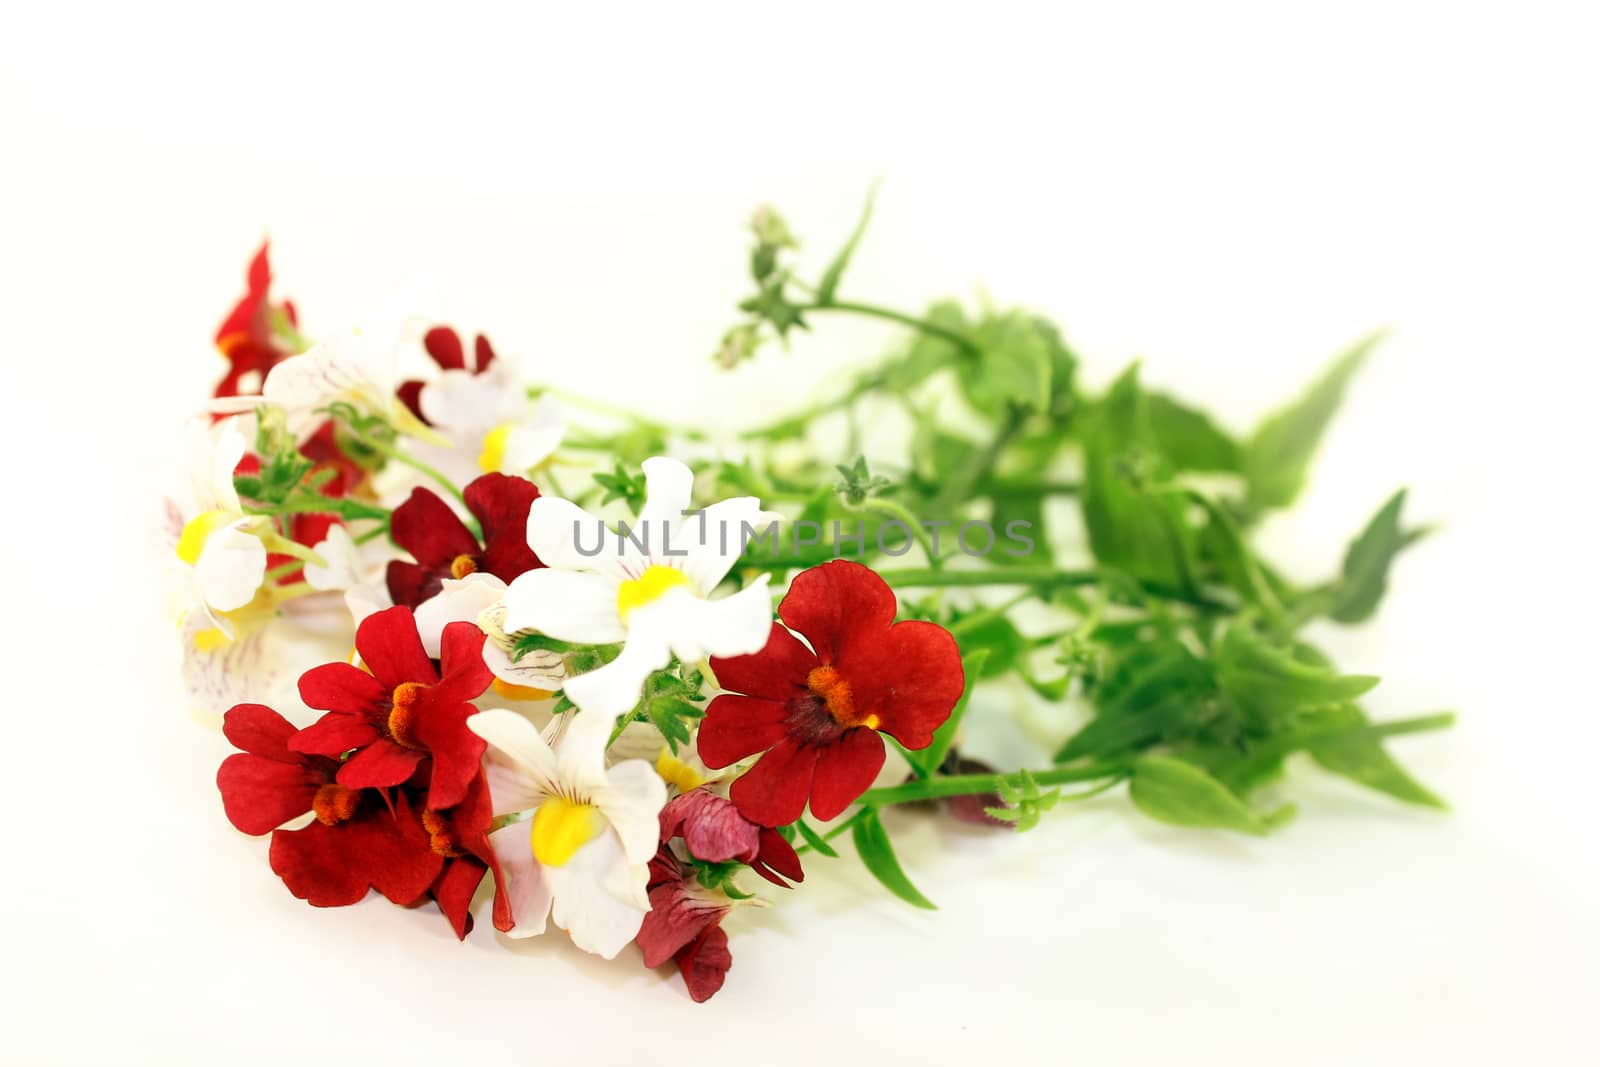 nemesia flower and leaves against a white background